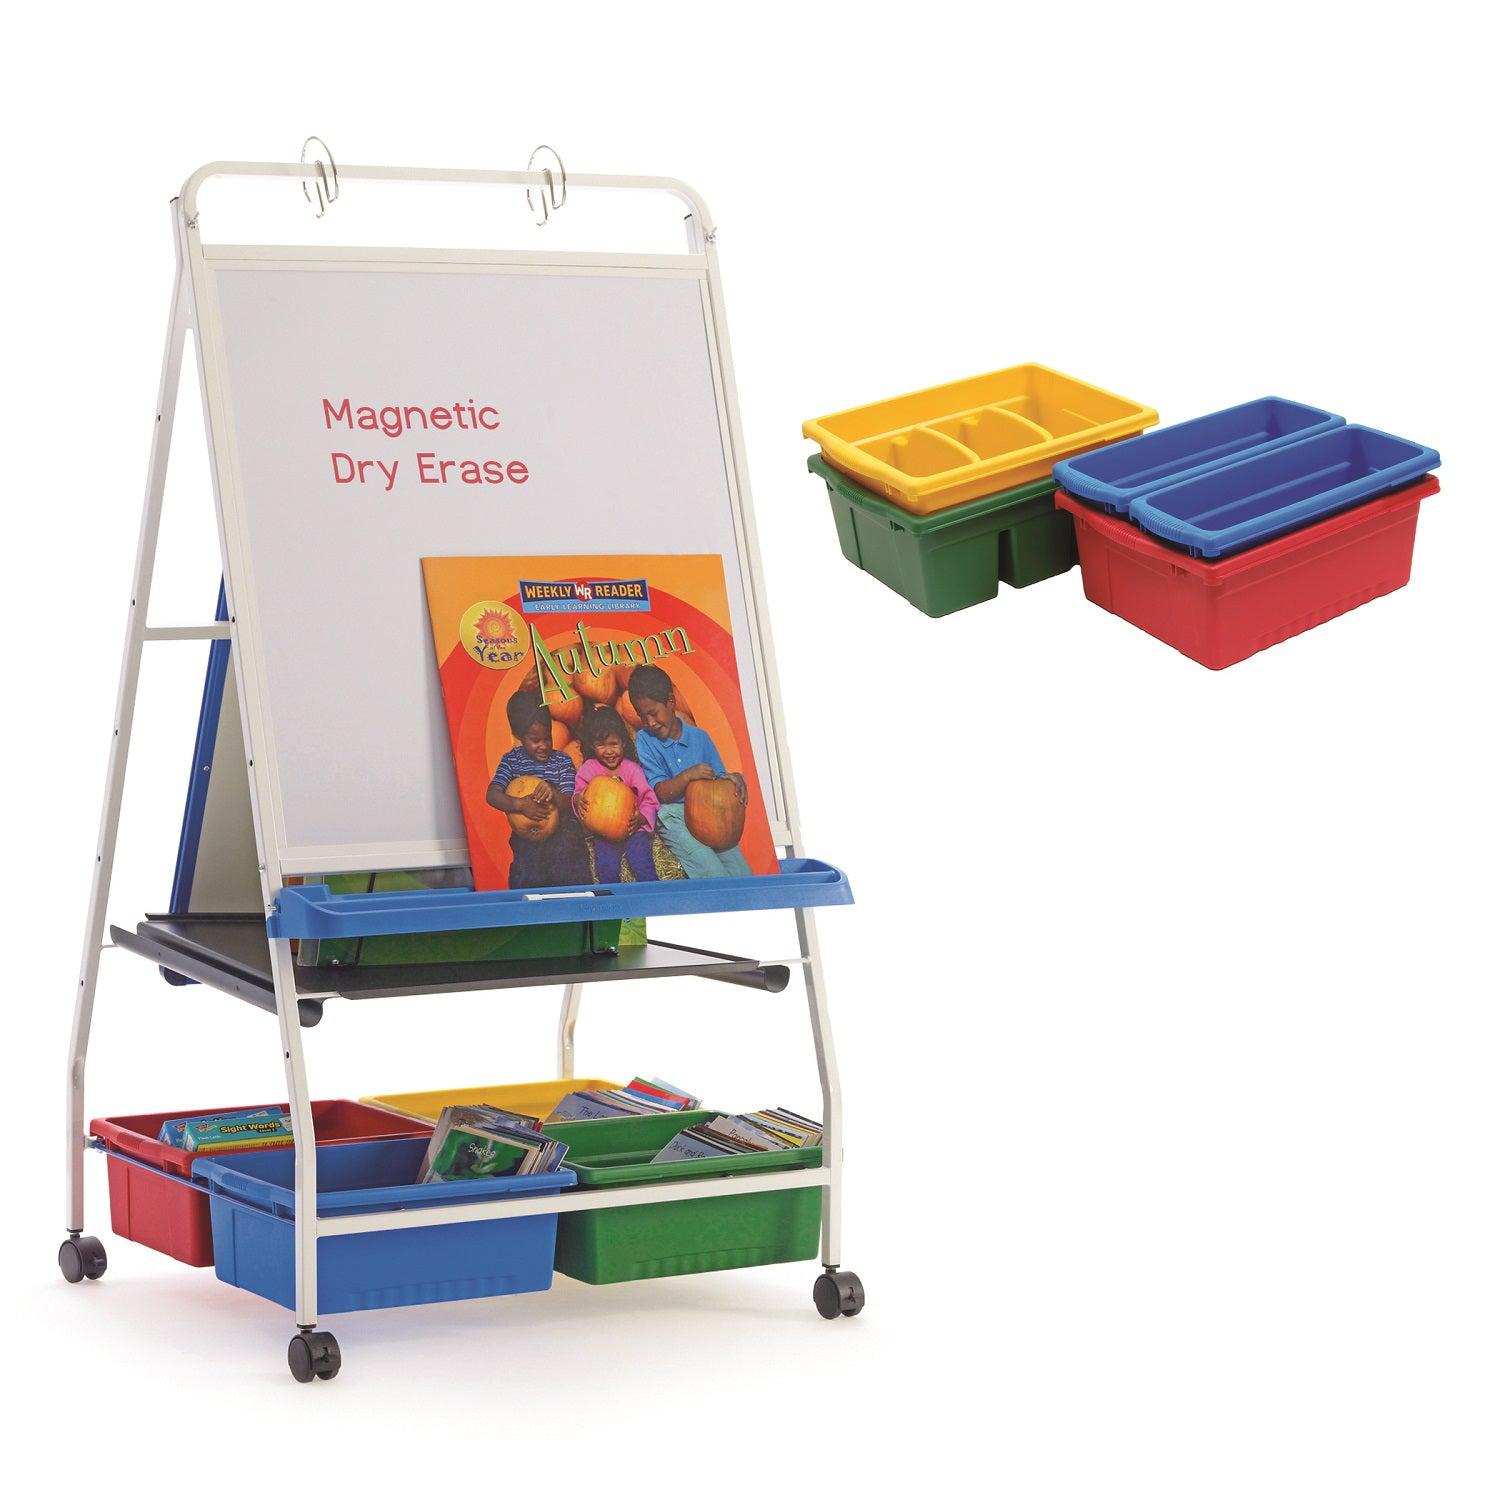 Classic Royal Reading/Writing Center with 2 Small, 1 Large and 2 Divided Tubs